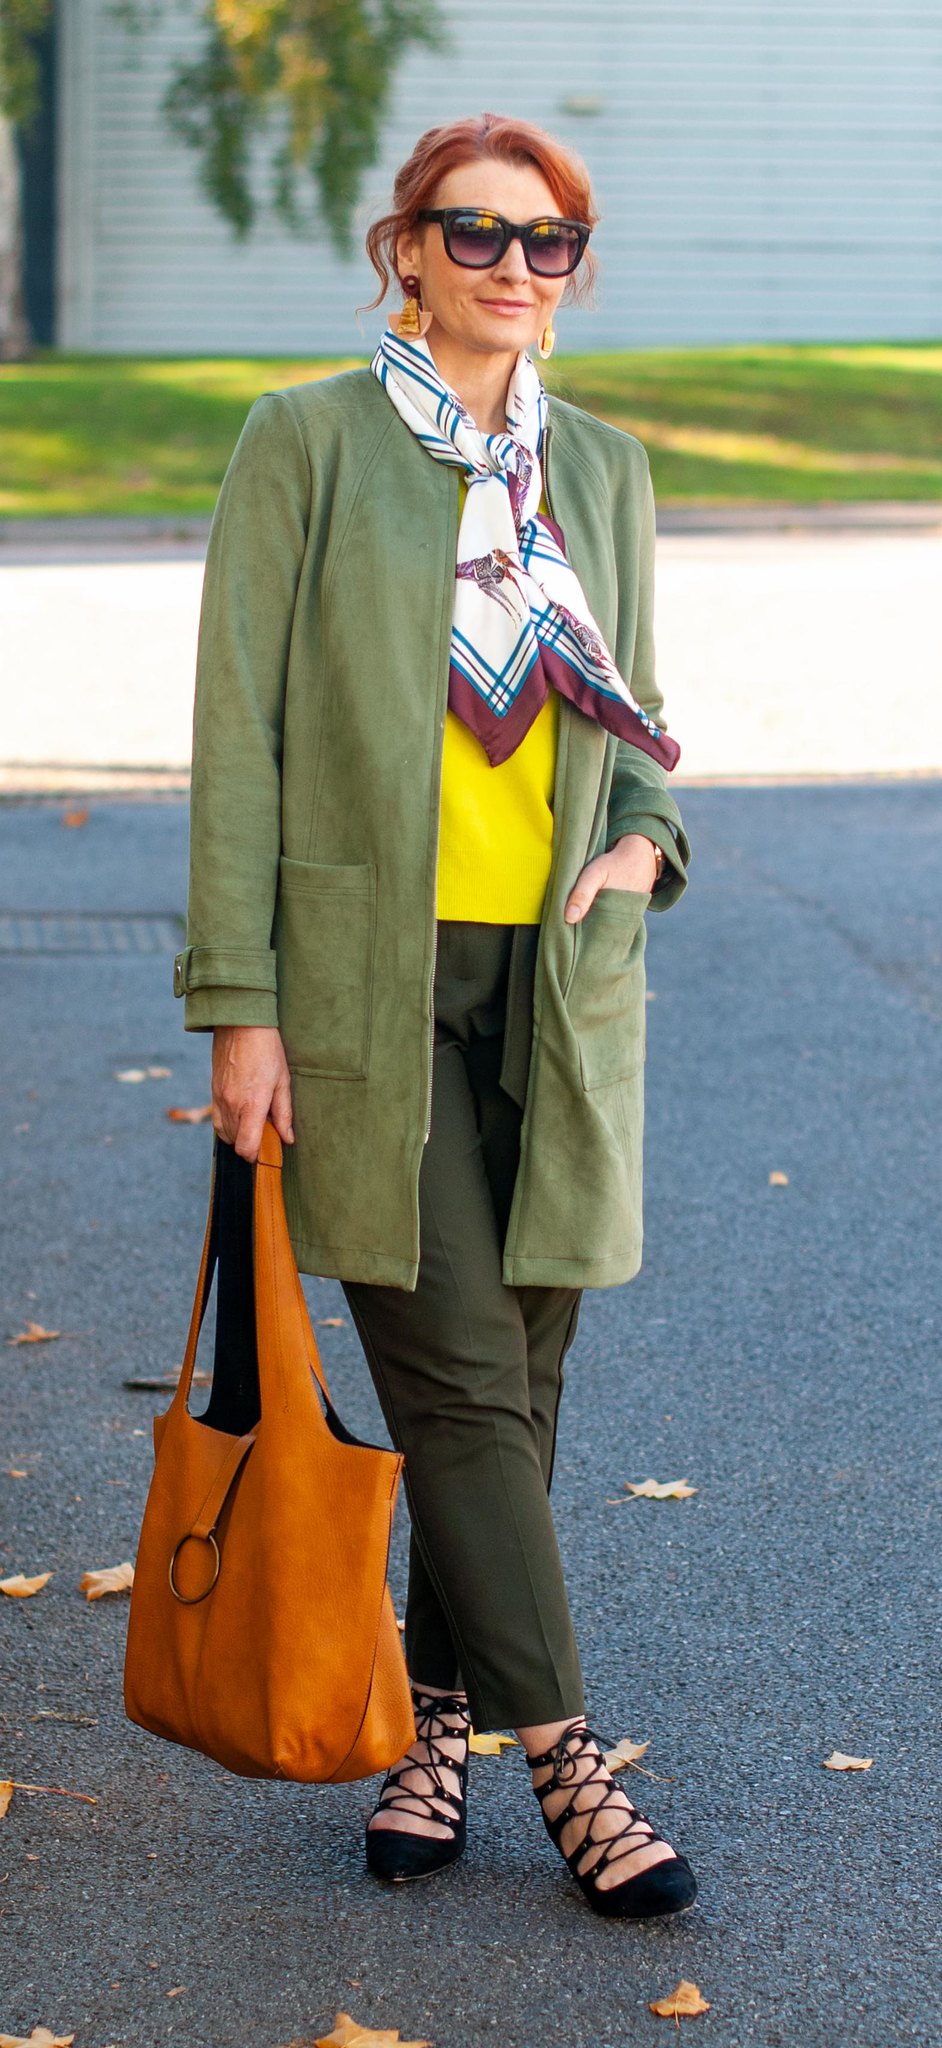 Styling Shades of Green and a Giraffe Print | Not DRessed As Lamb, over 40 fashion